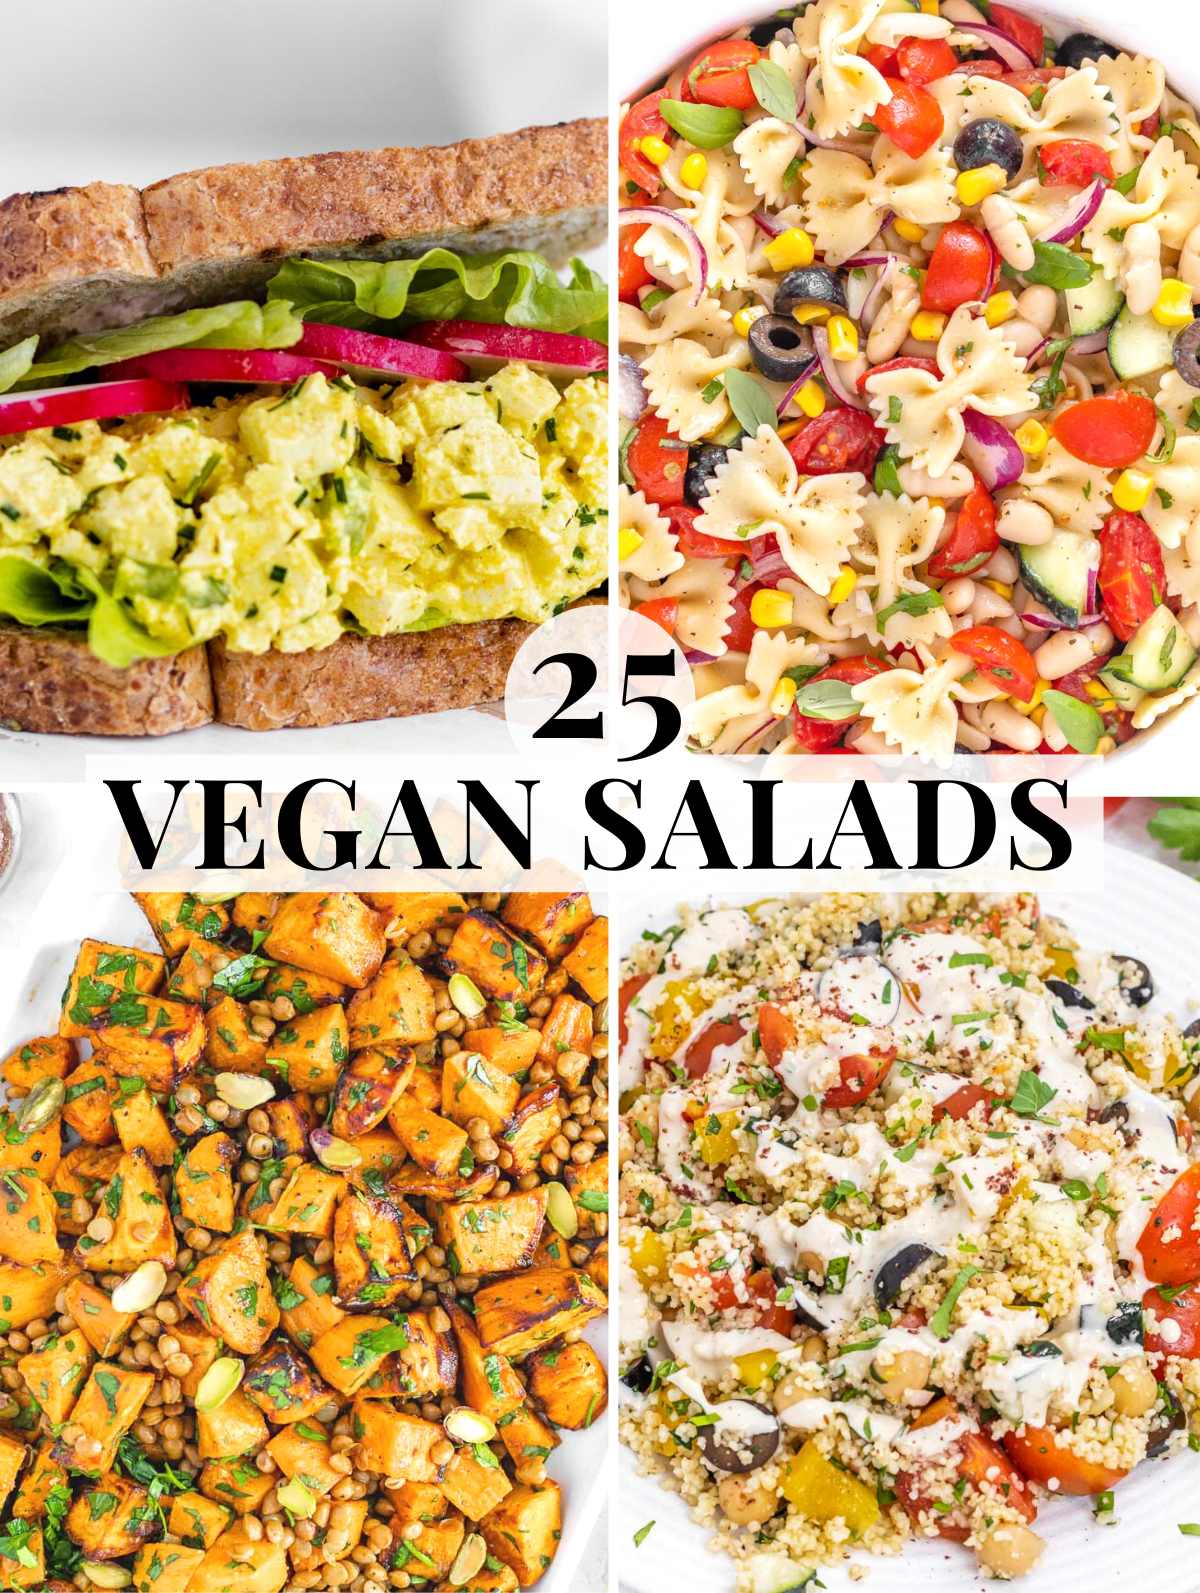 Vegan salads, recipes and ideas for salad as a meal